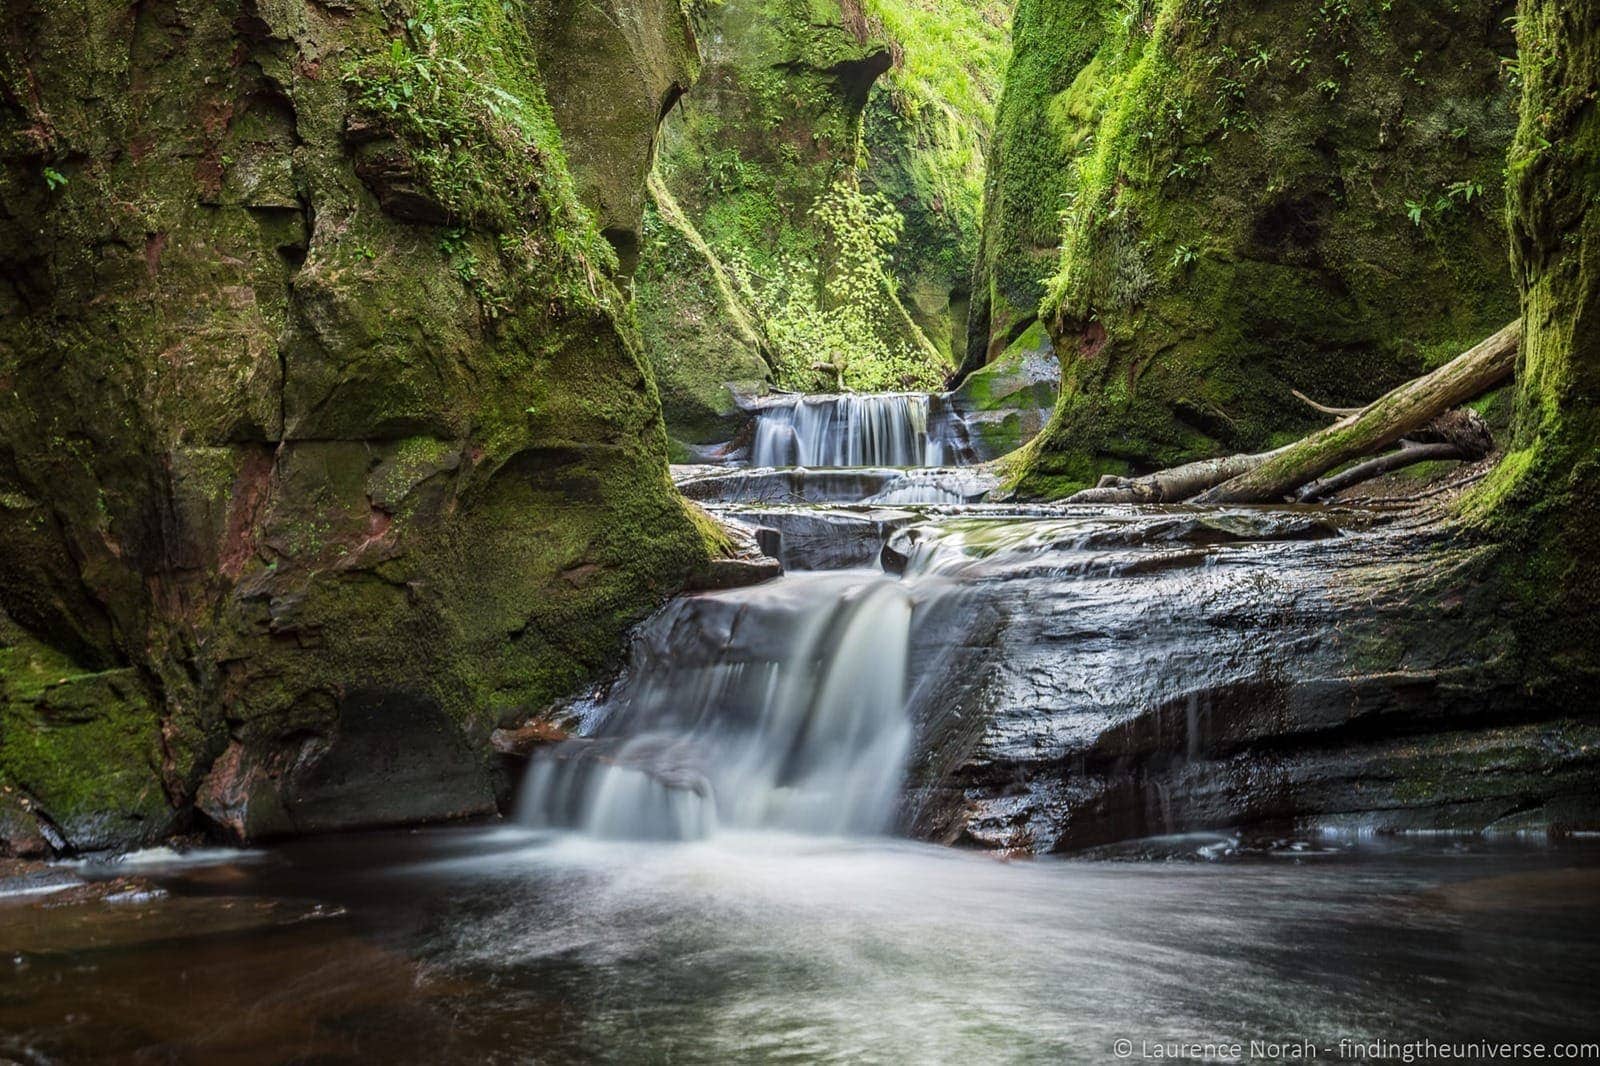 How to Find the Devil’s Pulpit in Finnich Glen, Scotland